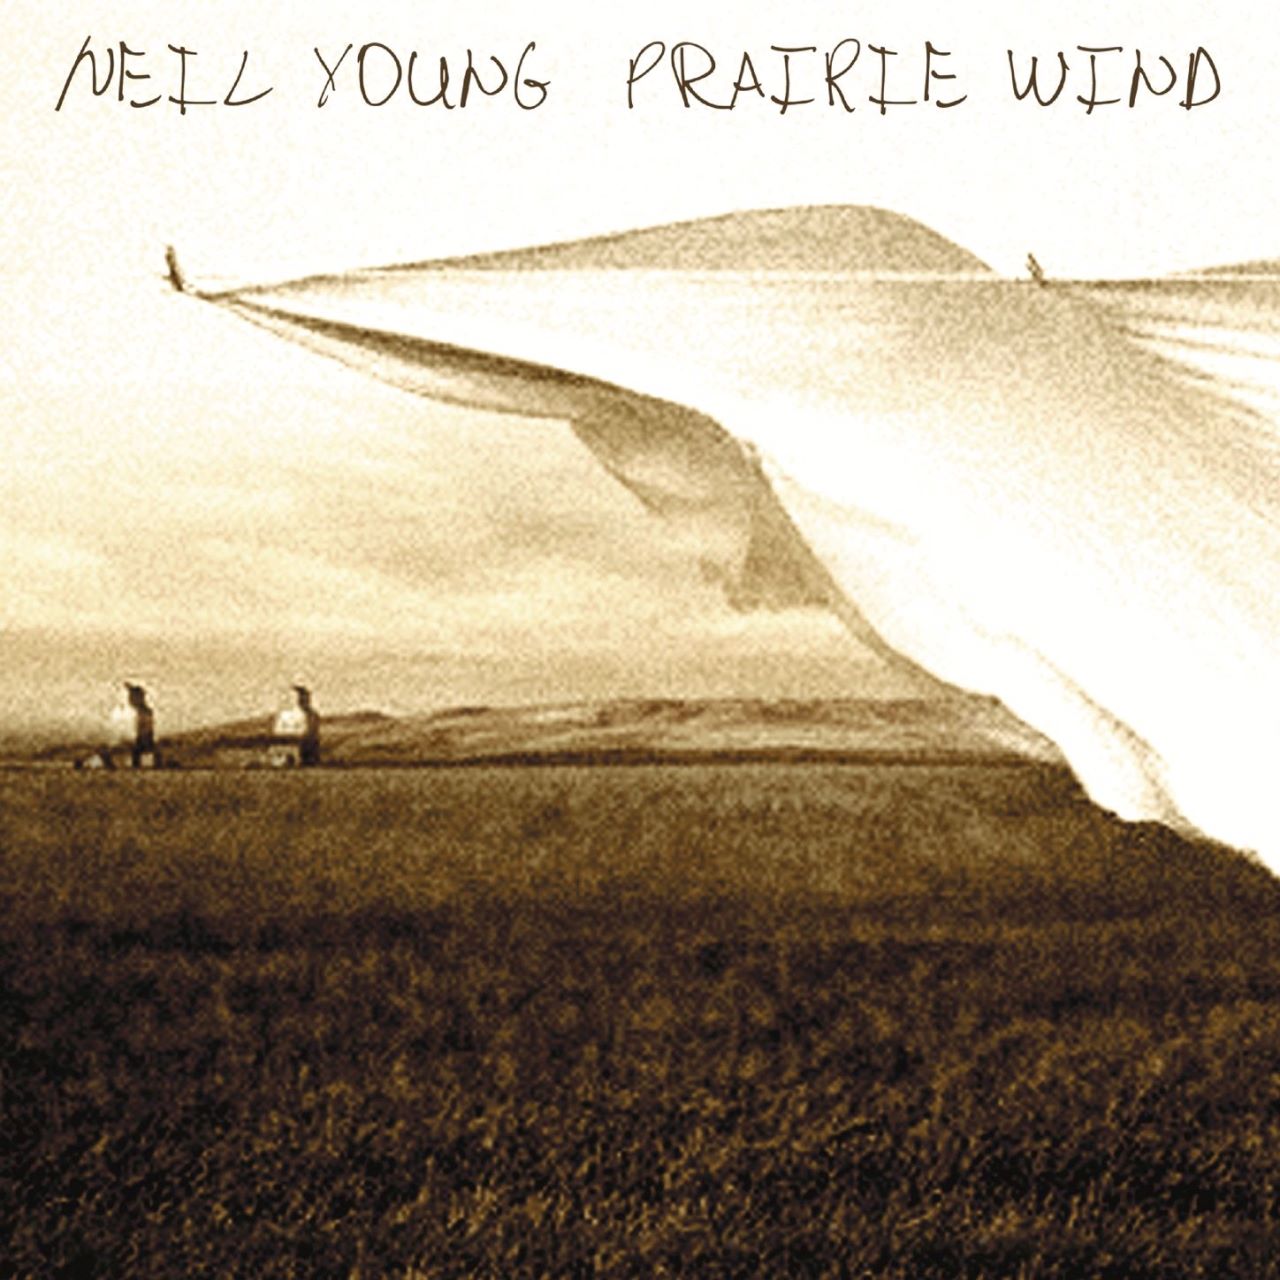 Neil Young - Prairie Wind cover album